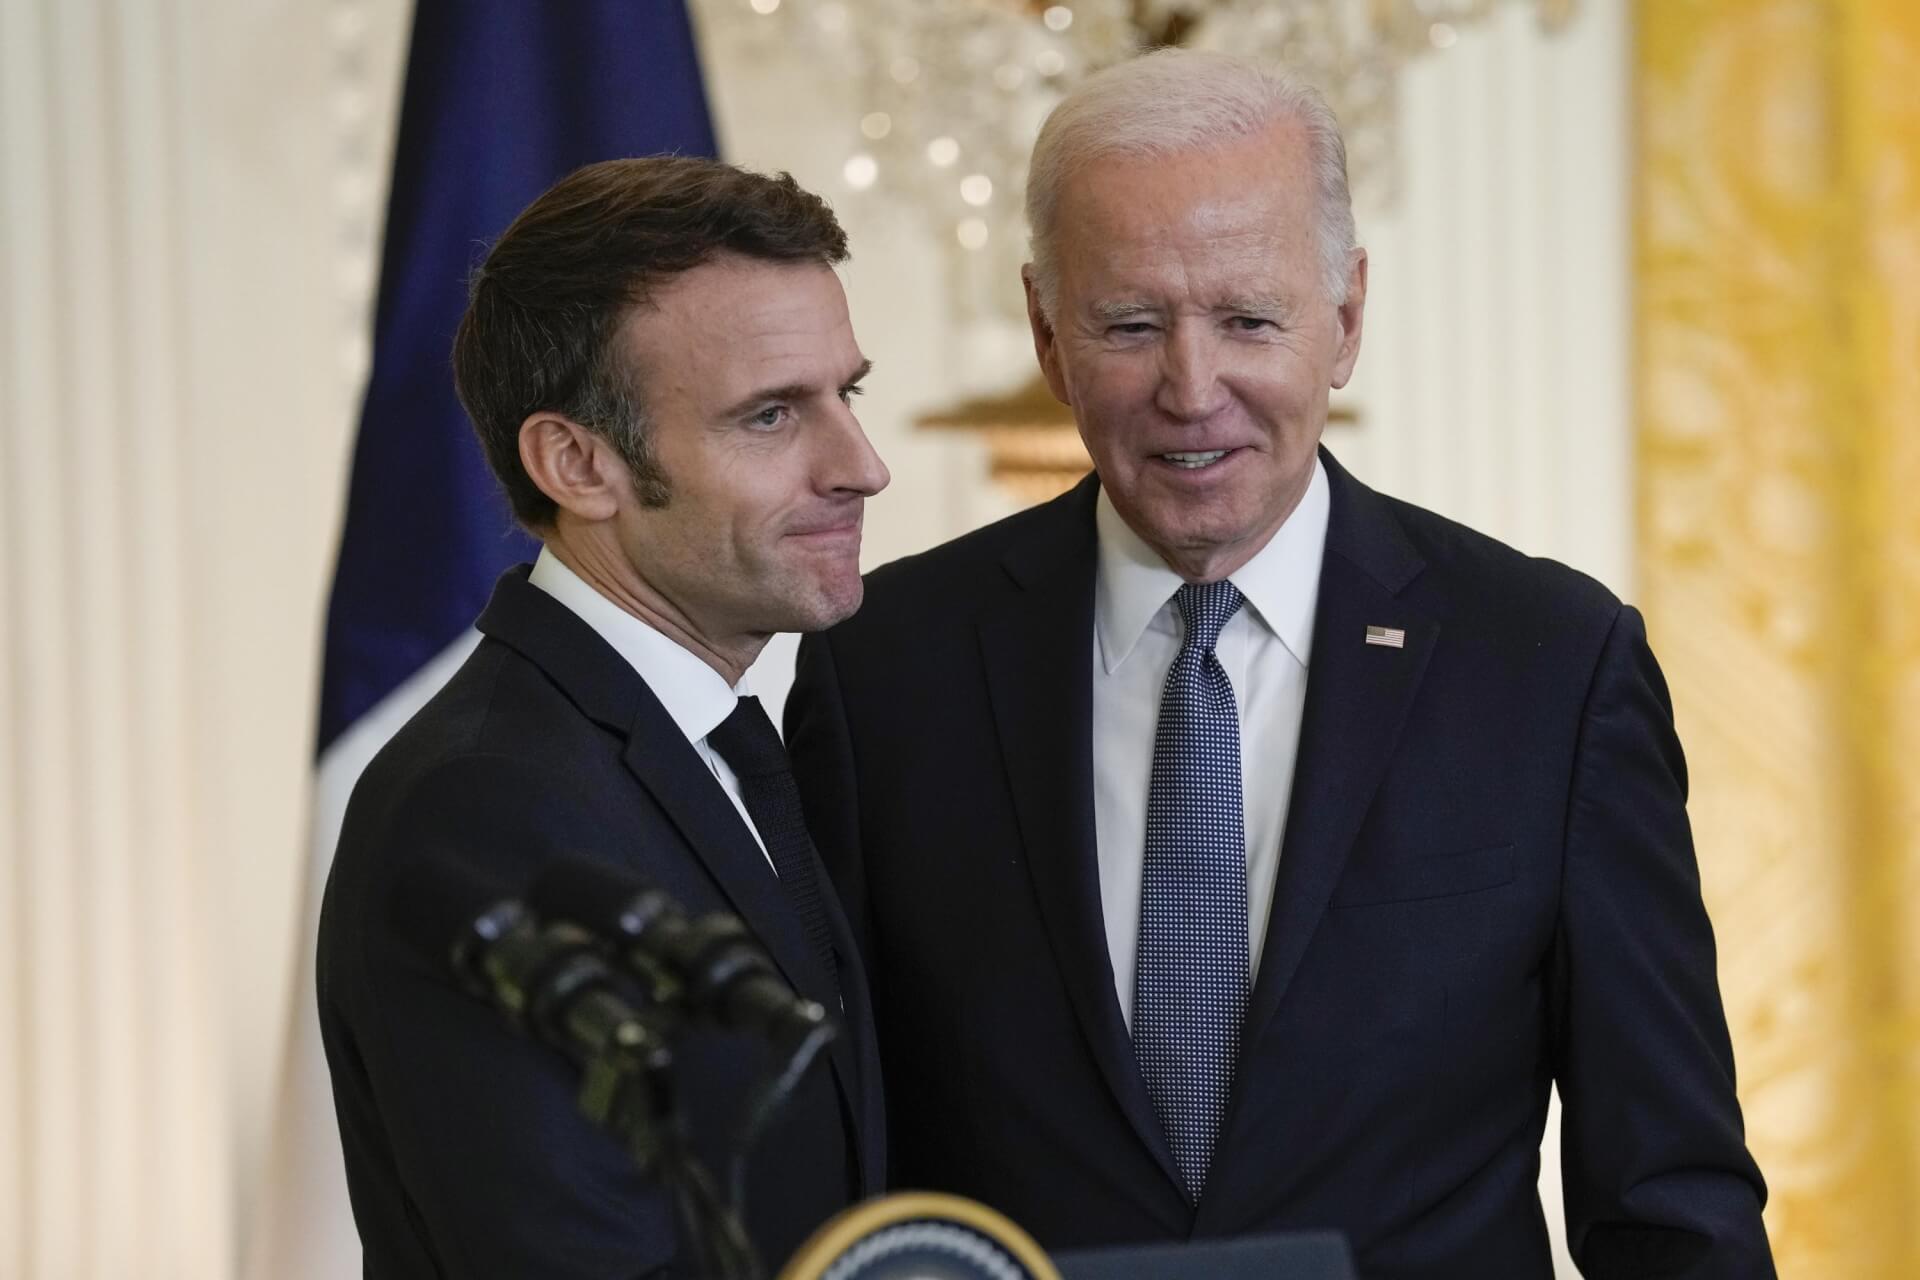 SUMMARY: French President Emmanuel Macron’s Visit to the US